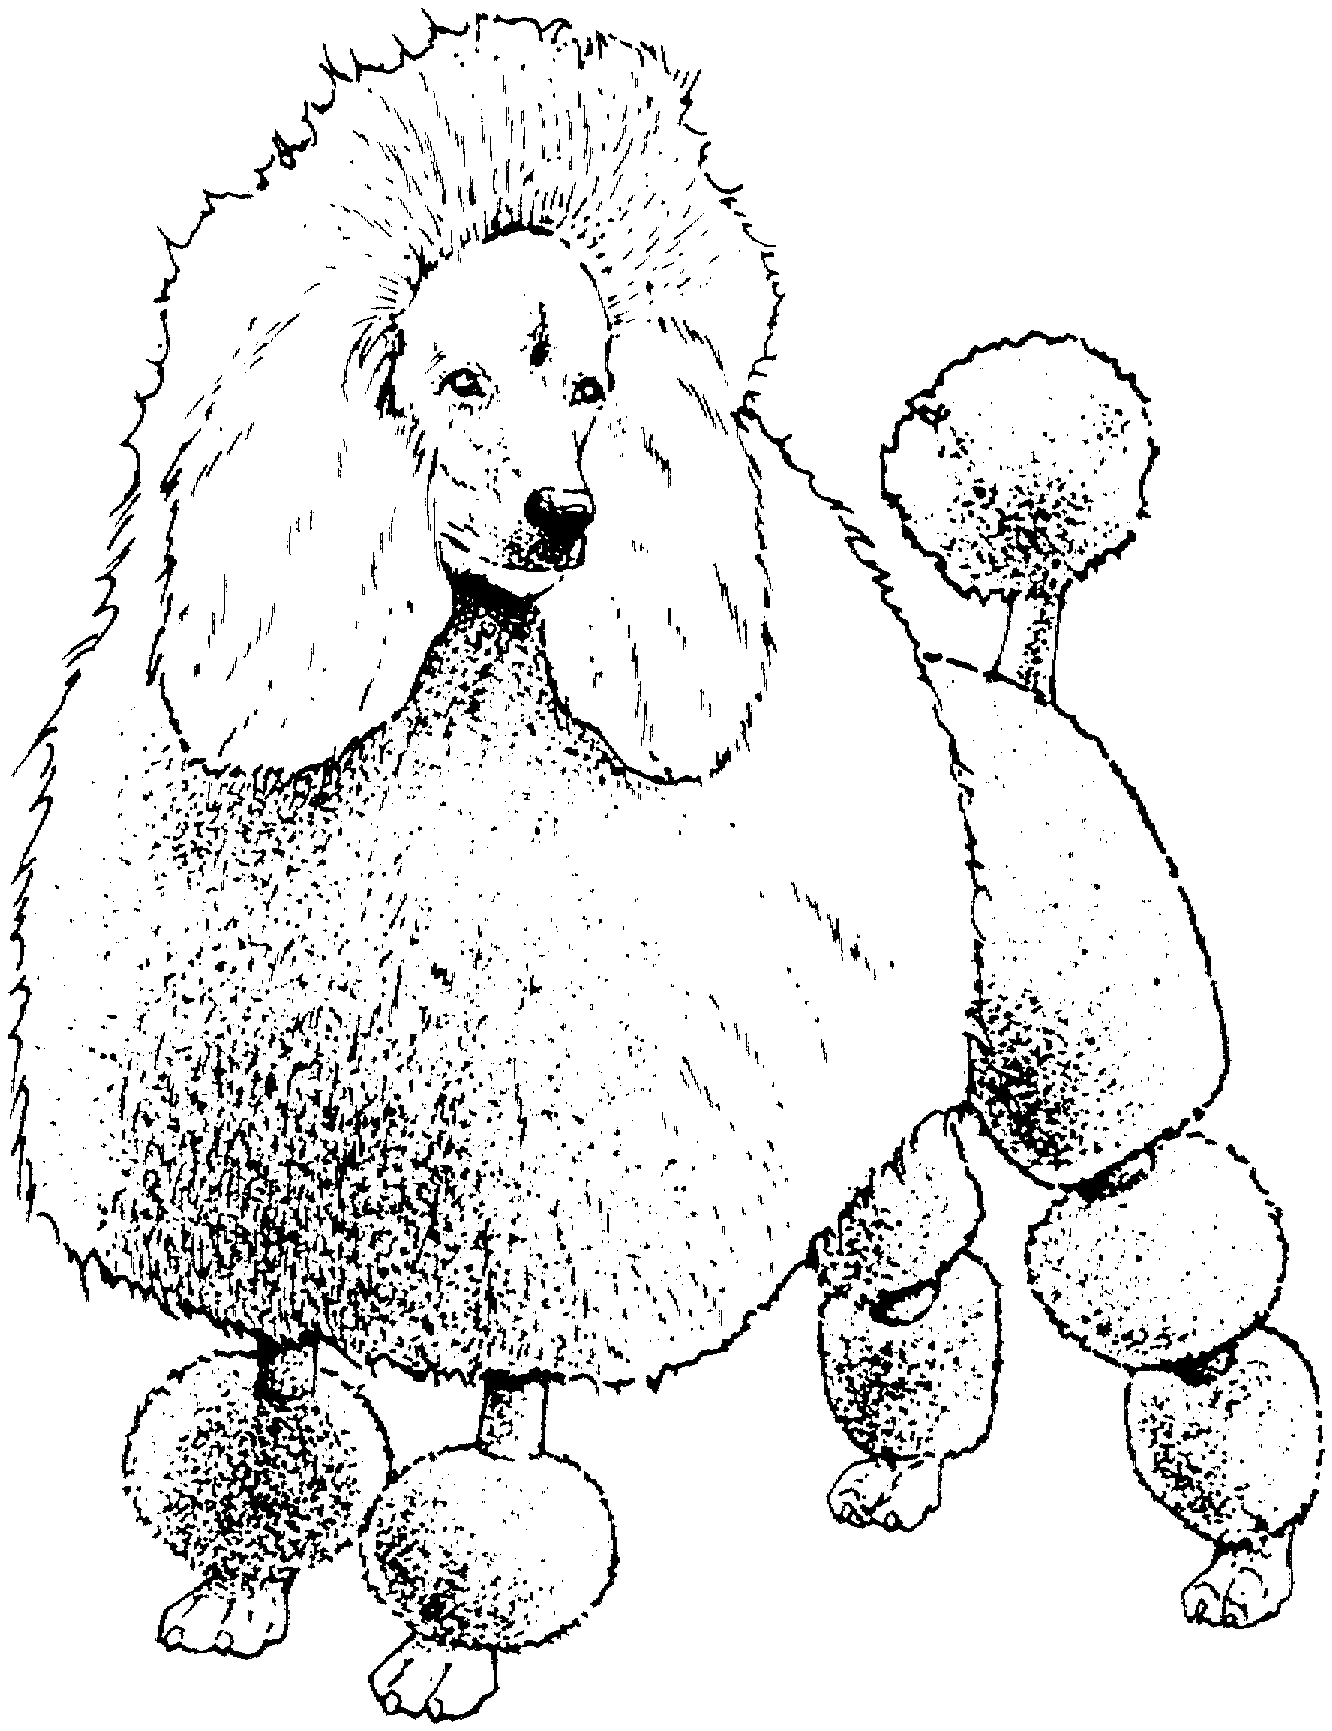 dog breeds coloring pages dog breed coloring pages pages breeds coloring dog 1 1